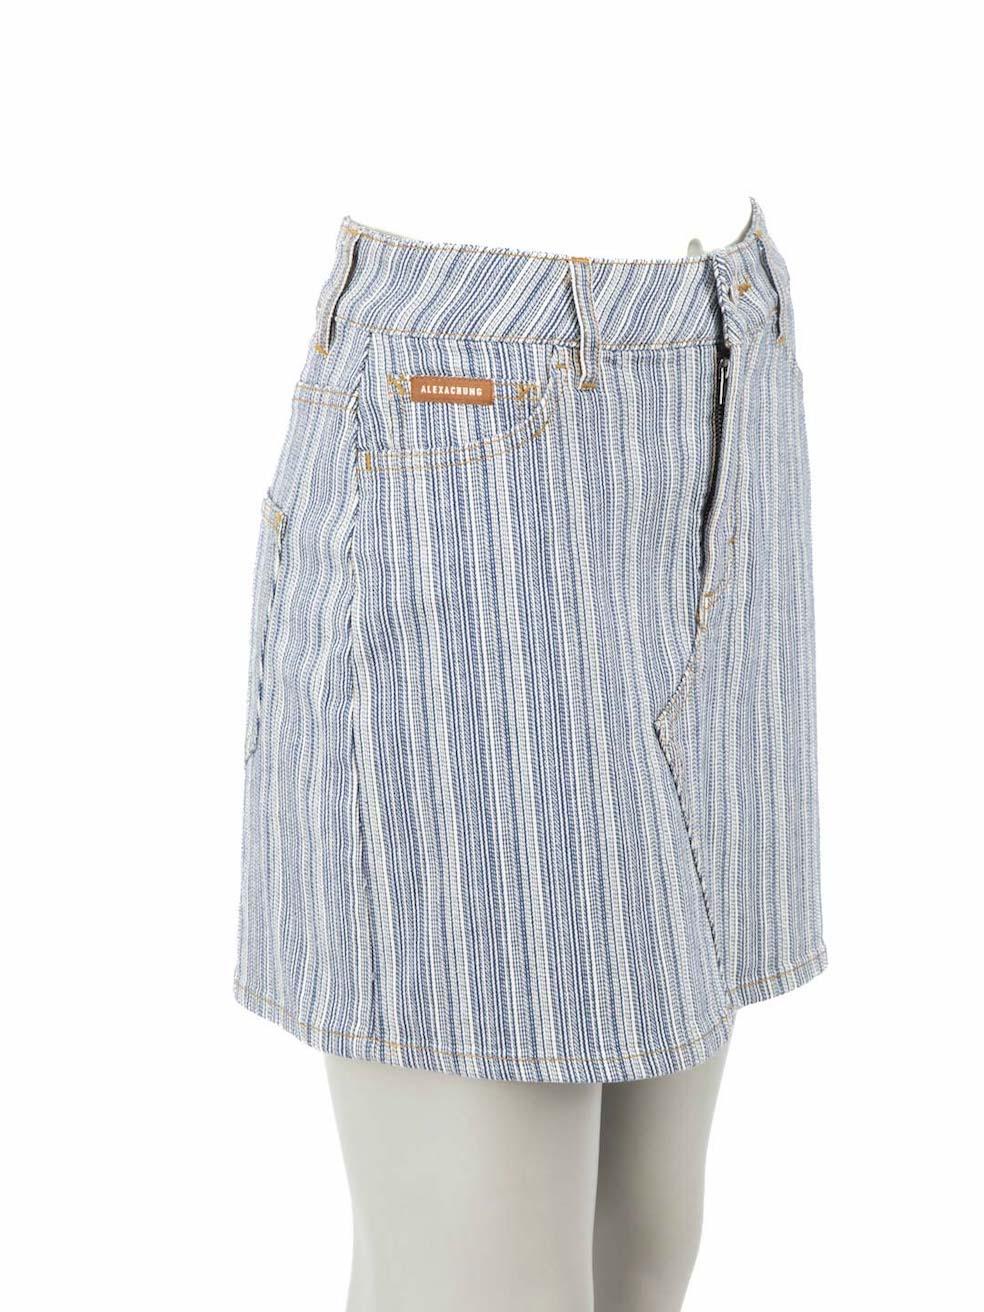 CONDITION is Very good. Hardly any visible wear to skirt is evident on this used Alexa Chung designer resale item.
 
Details
Blue
Cotton
Denim skirt
Striped pattern
Figure hugging fit
Mini
3x Front pockets
2x Back pockets
Fly zip and button